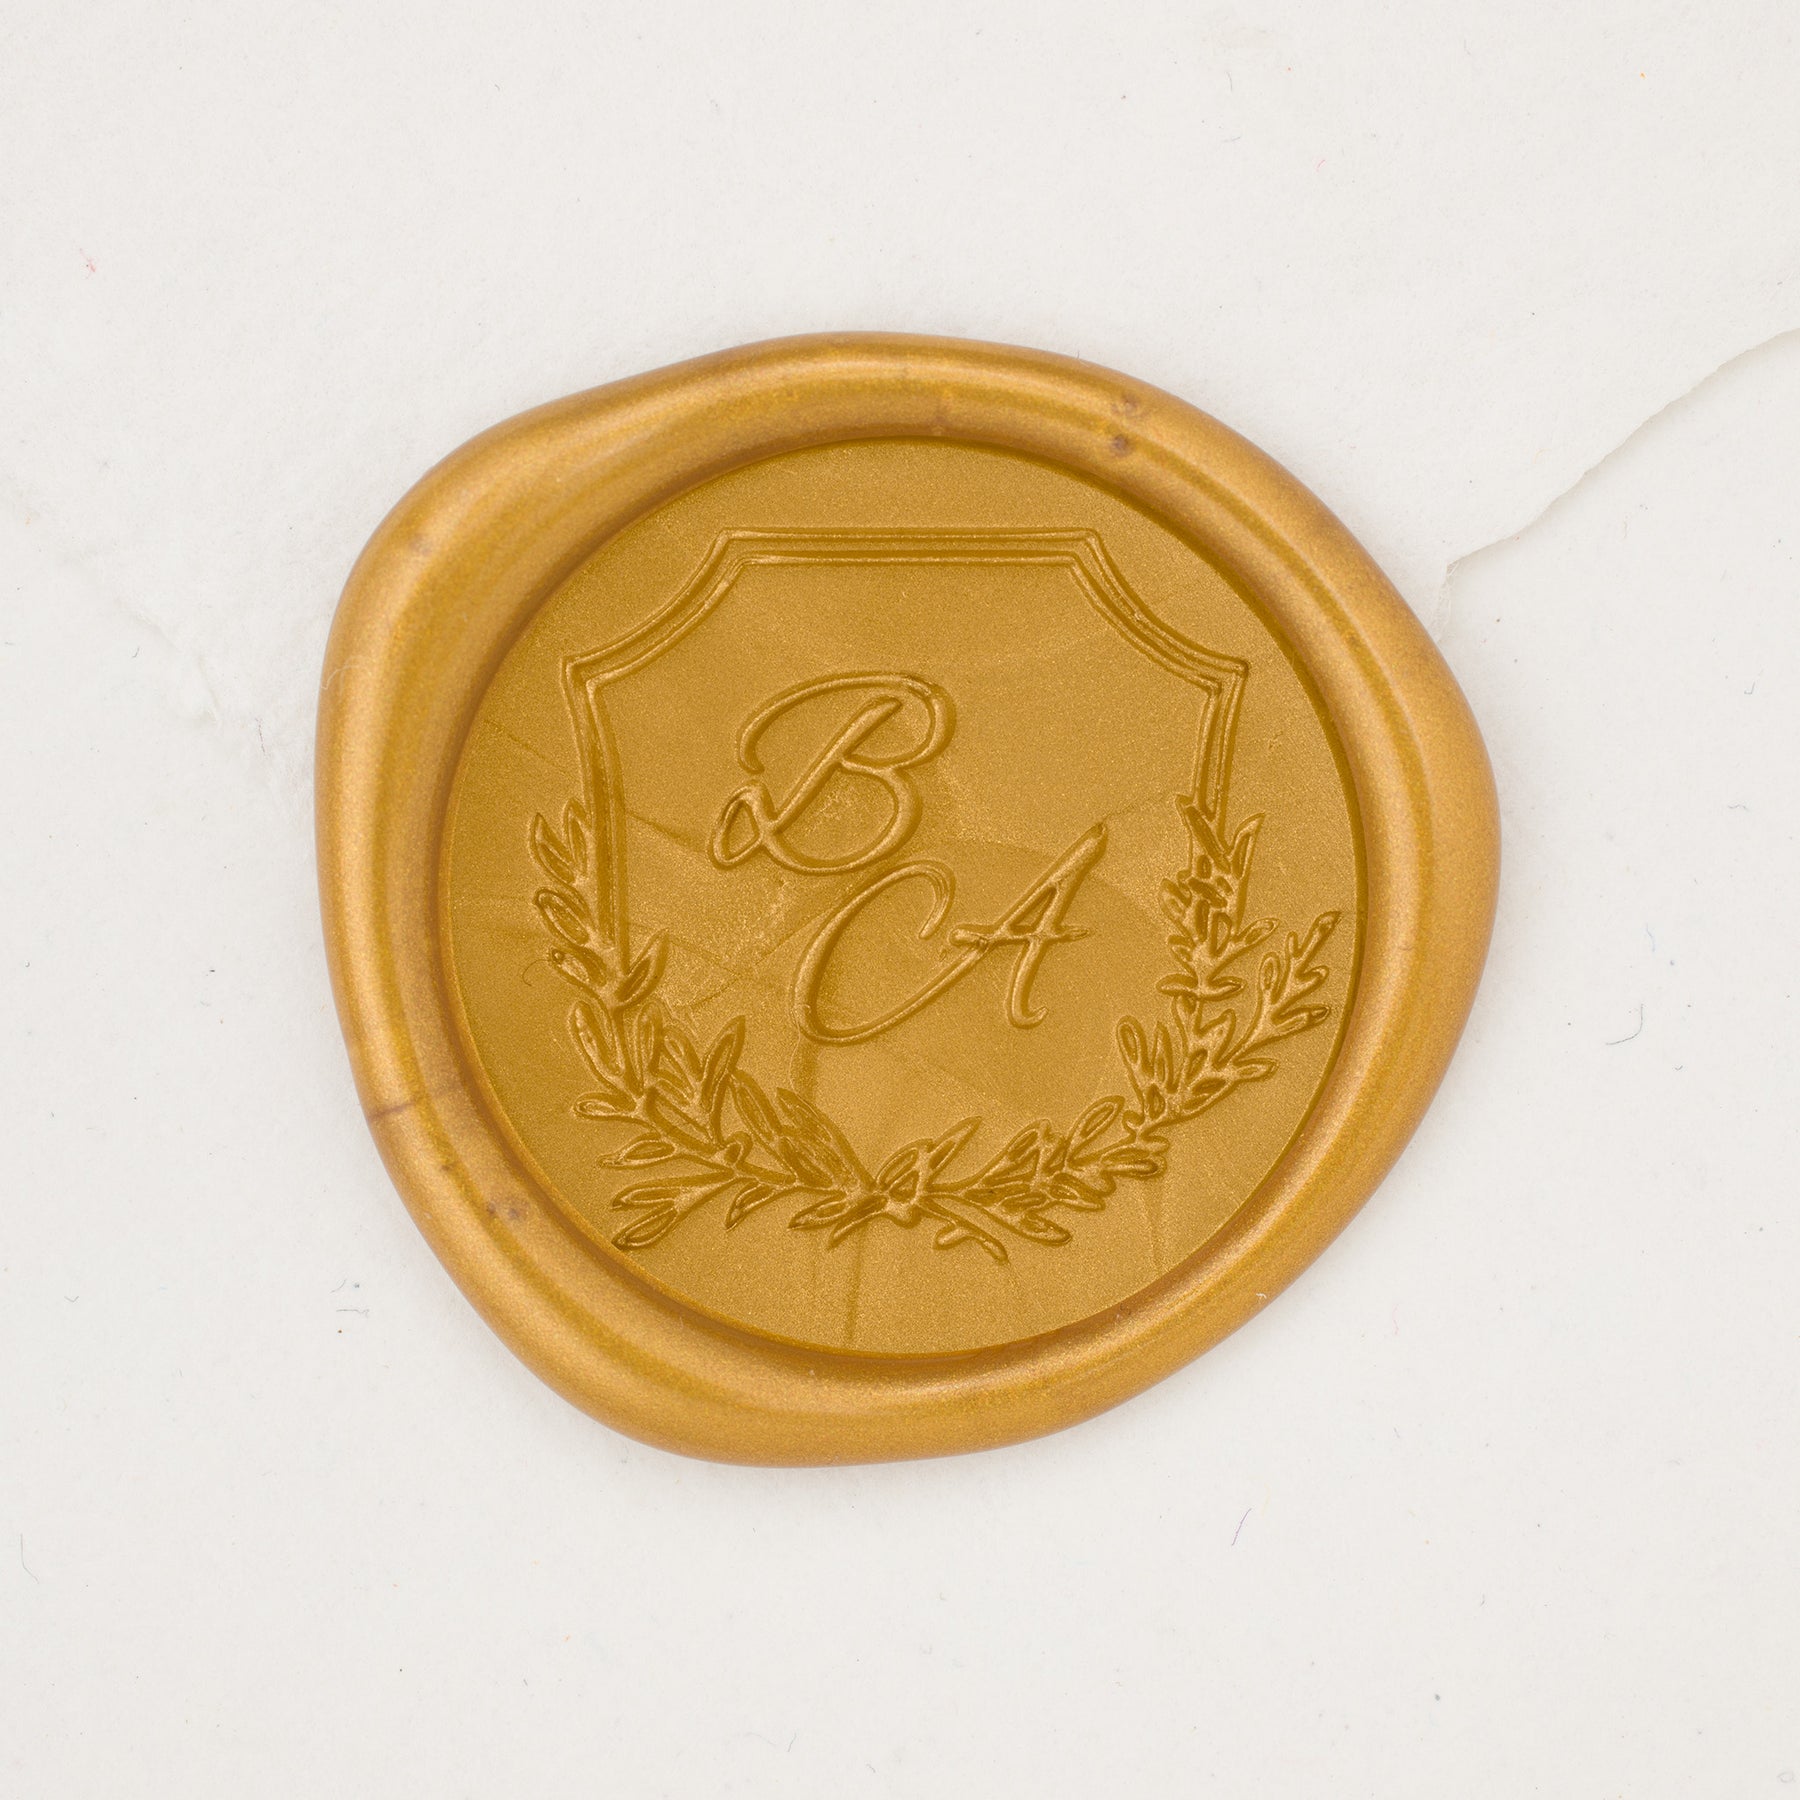 Custom Made Wax Seal Stamp - Artistic Handmade Fully Customized Wax Seal Stamp Premium Kit - with Your Own Artwork